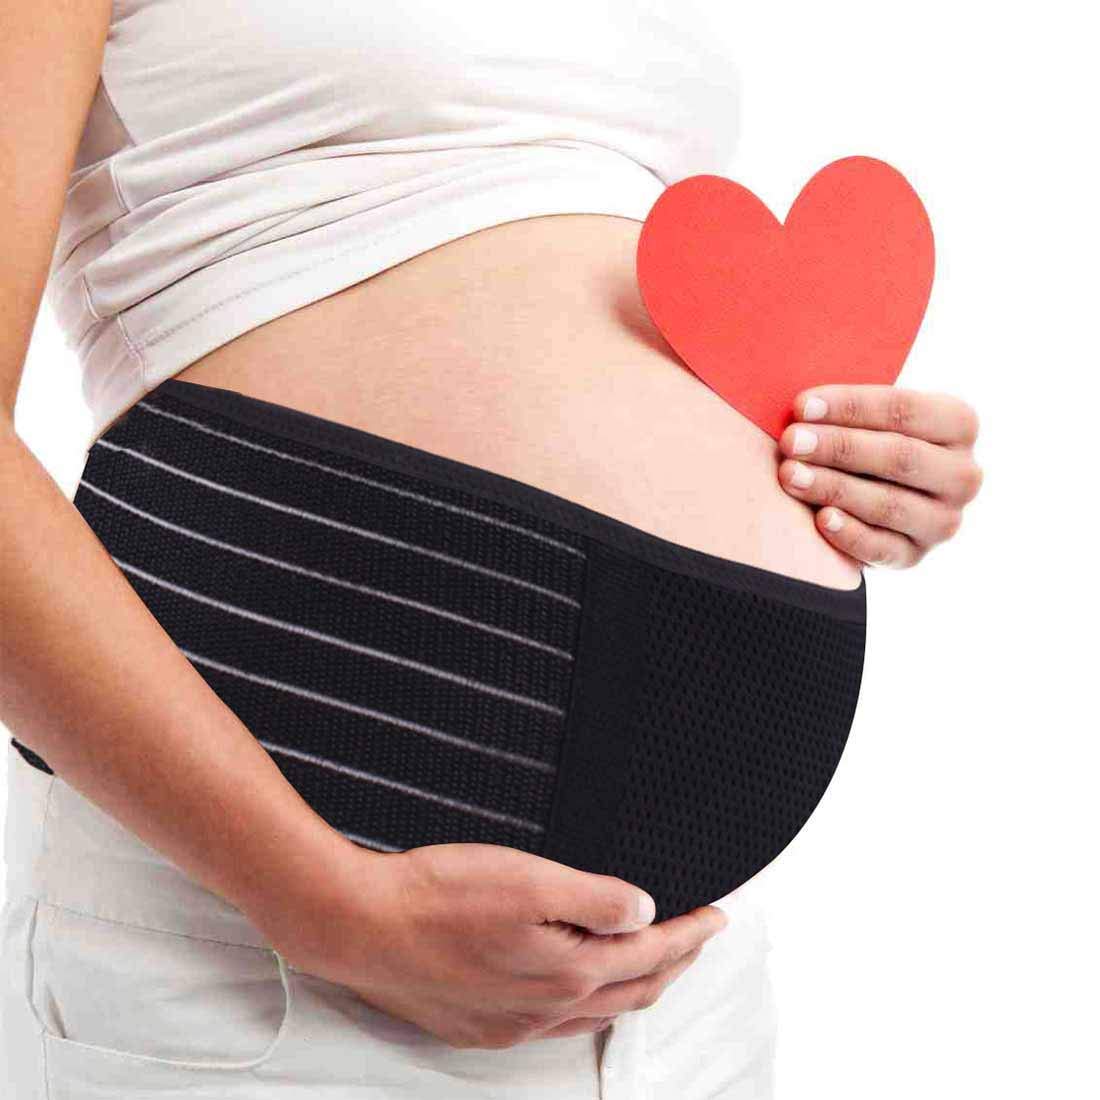 Maternity Belly Band for Pregnancy - Soft & Breathable Pregnancy Belly